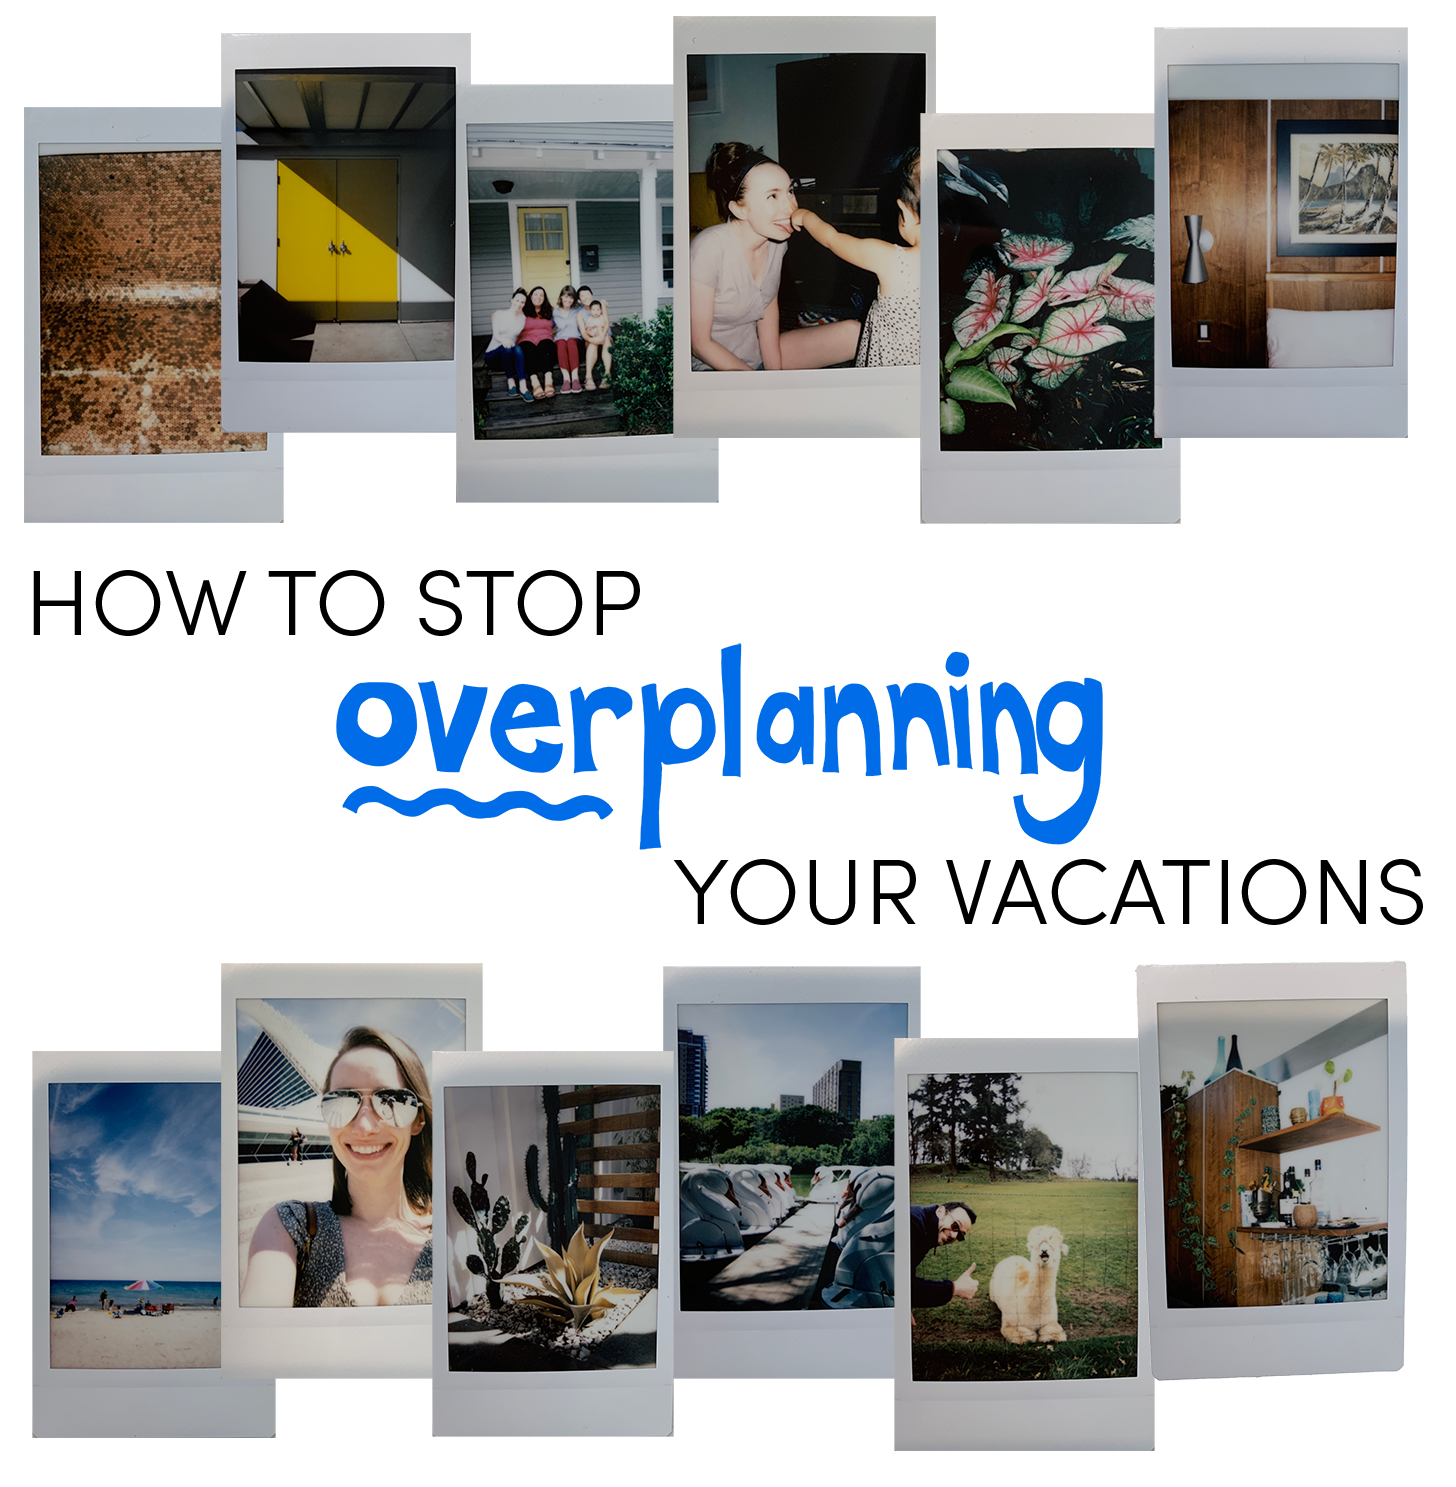 How to Stop Overplanning Your Vacations